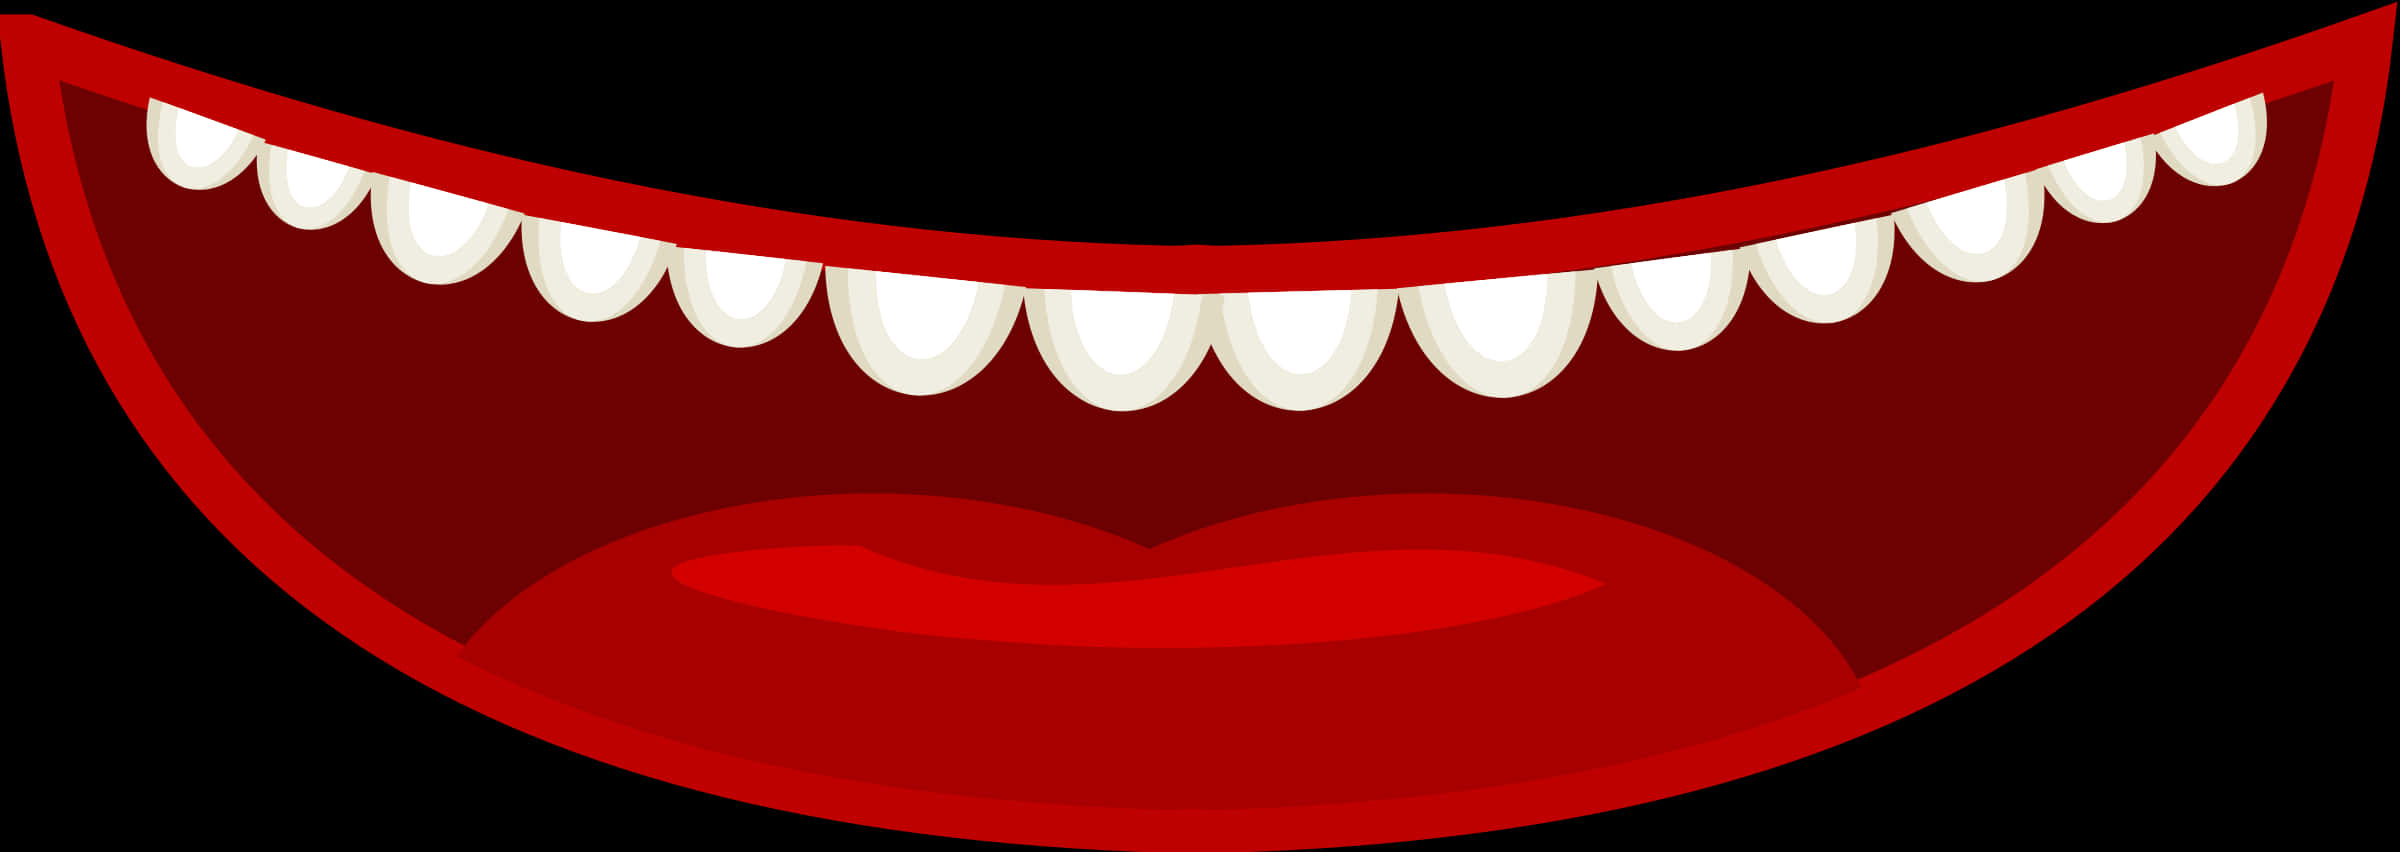 A Cartoon Mouth With Teeth And Mouth Open